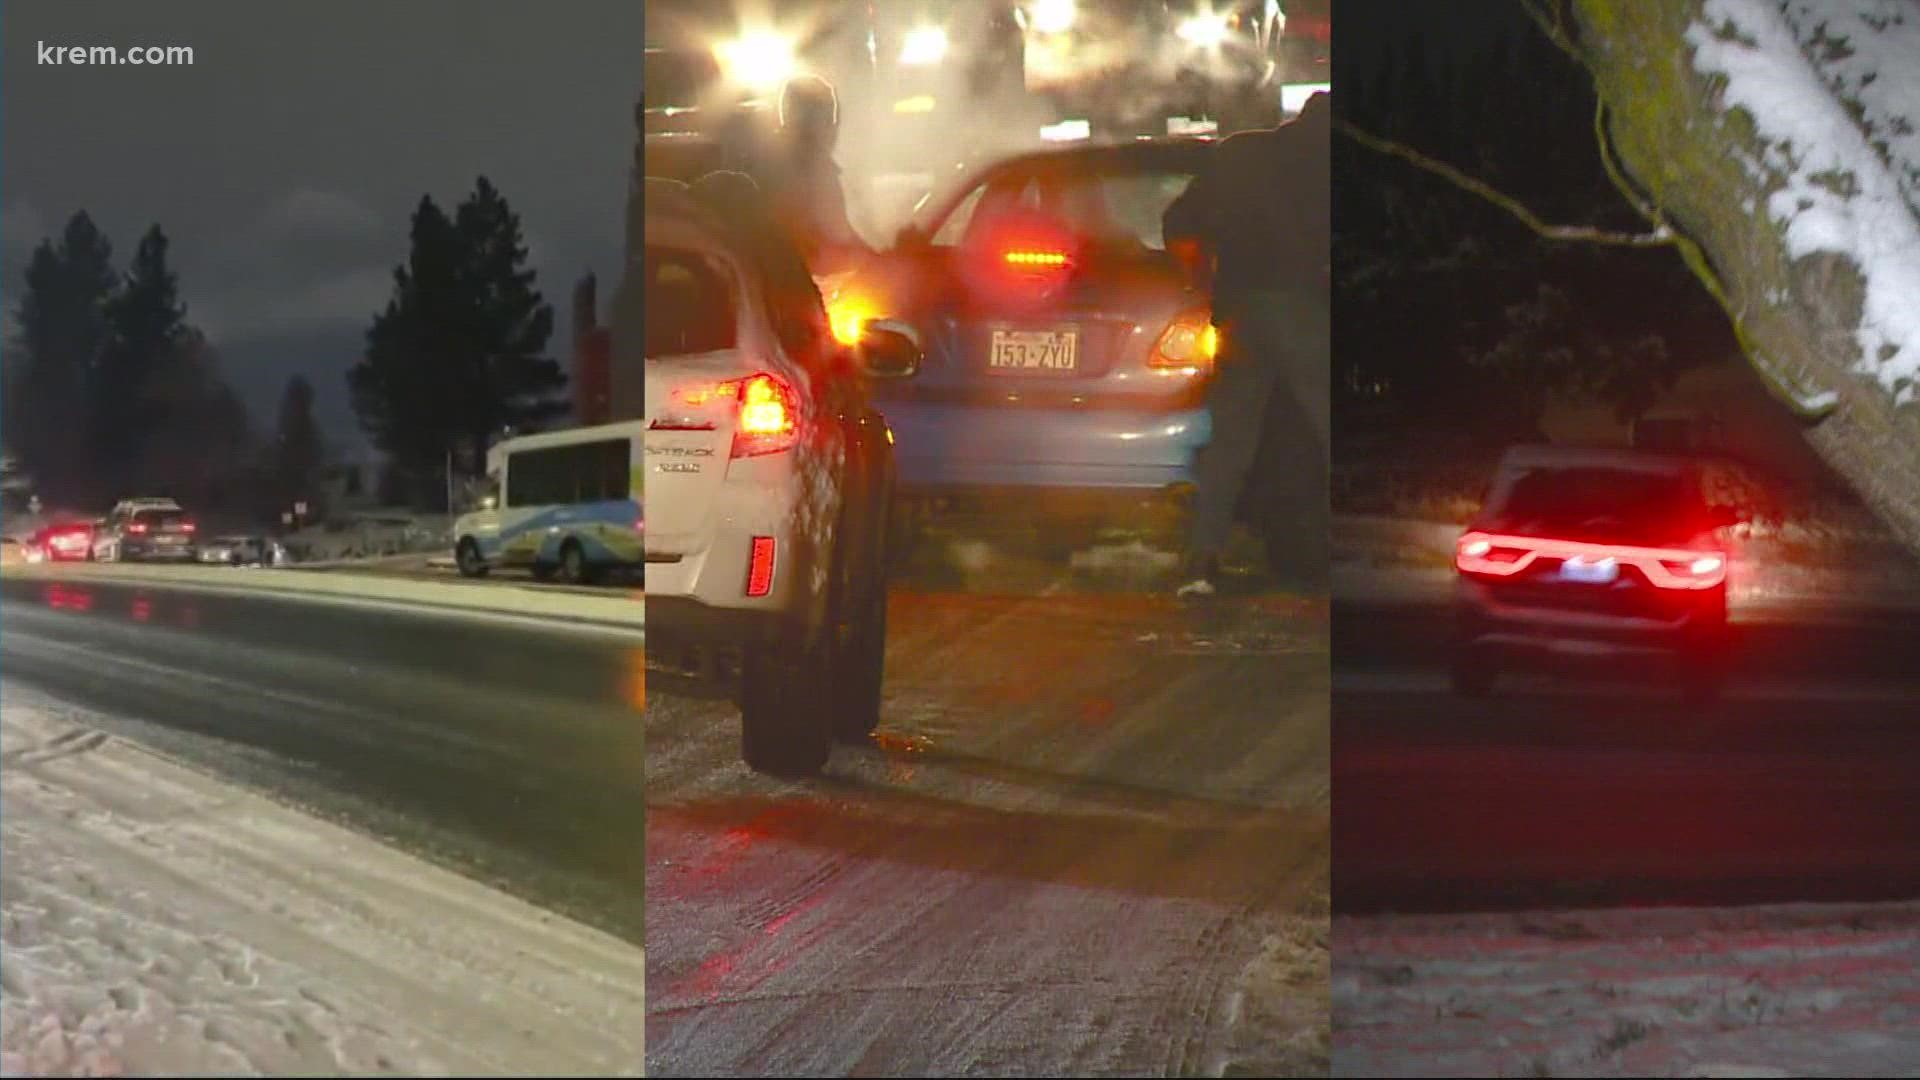 The road conditions caused traffic jams, crashes and treacherous commutes for drivers on Thursday evening.